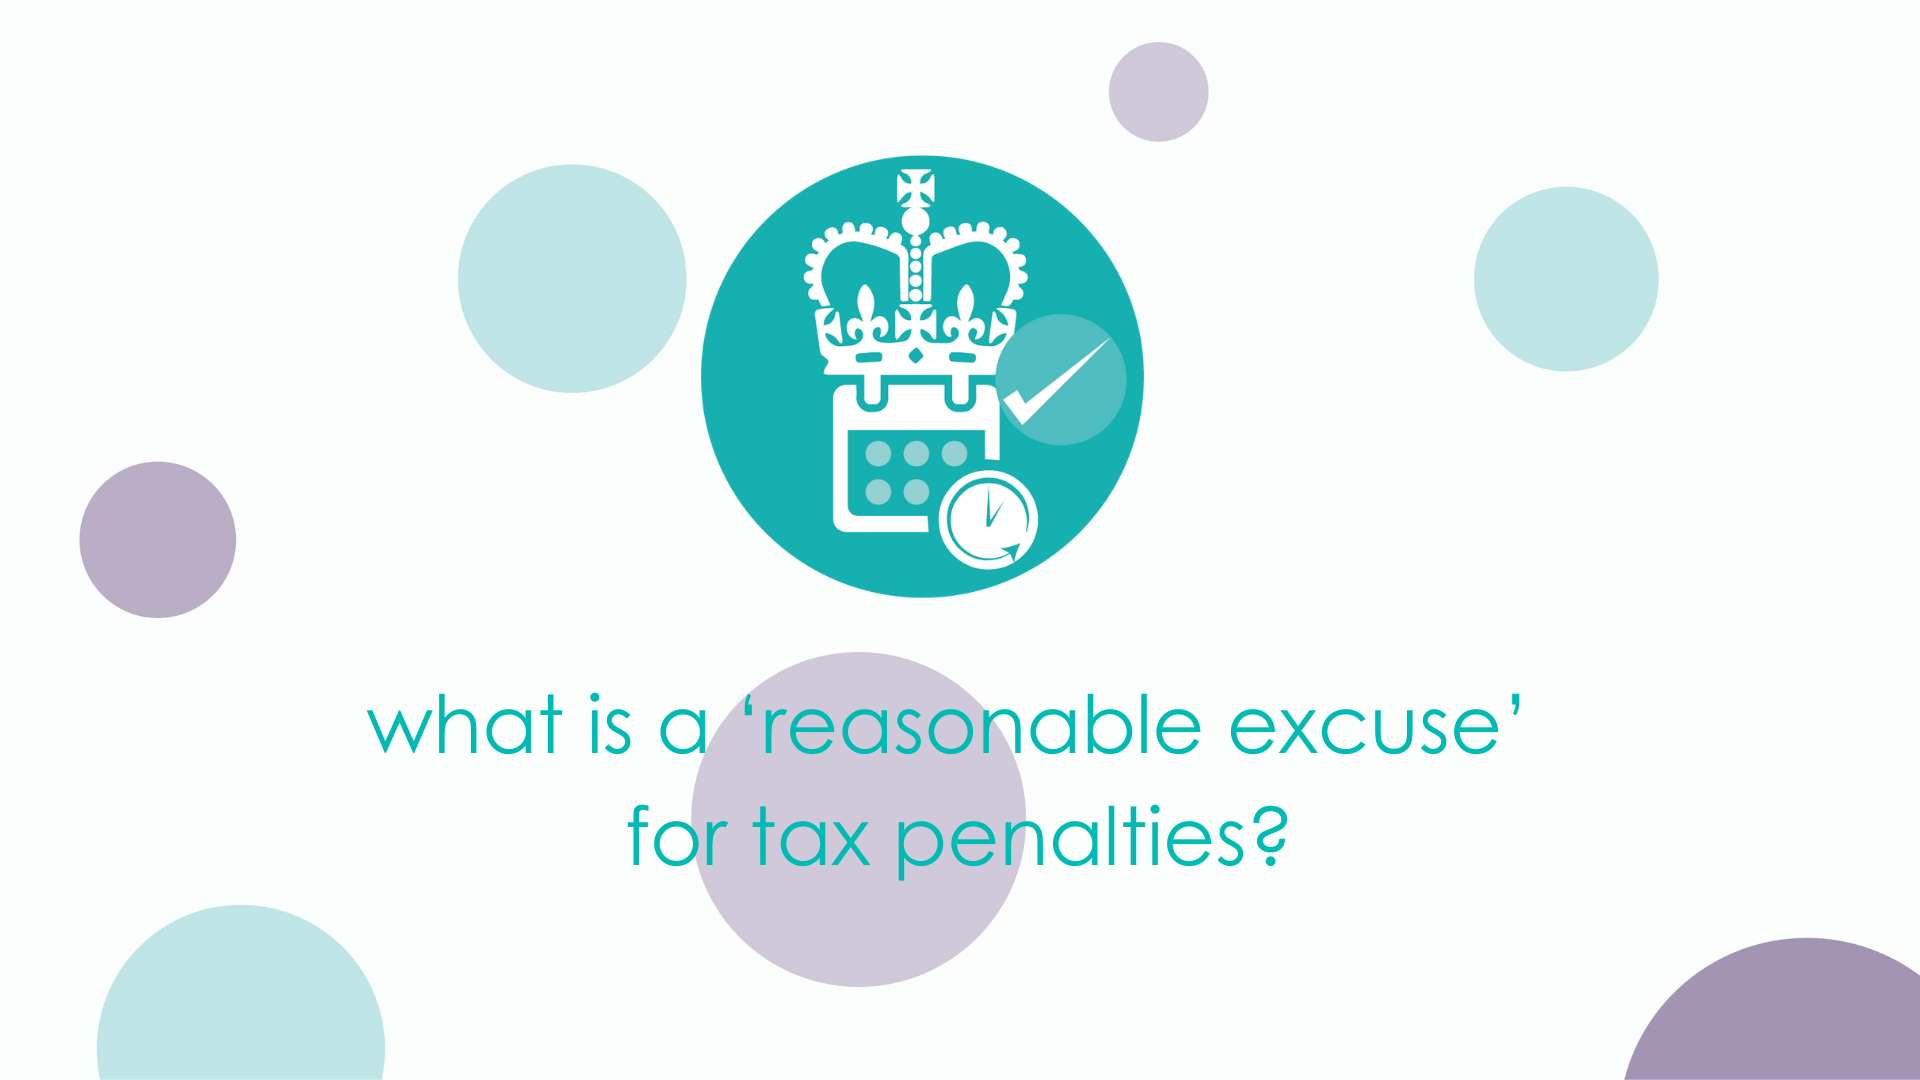 what is a ‘reasonable excuse’ for tax penalties?